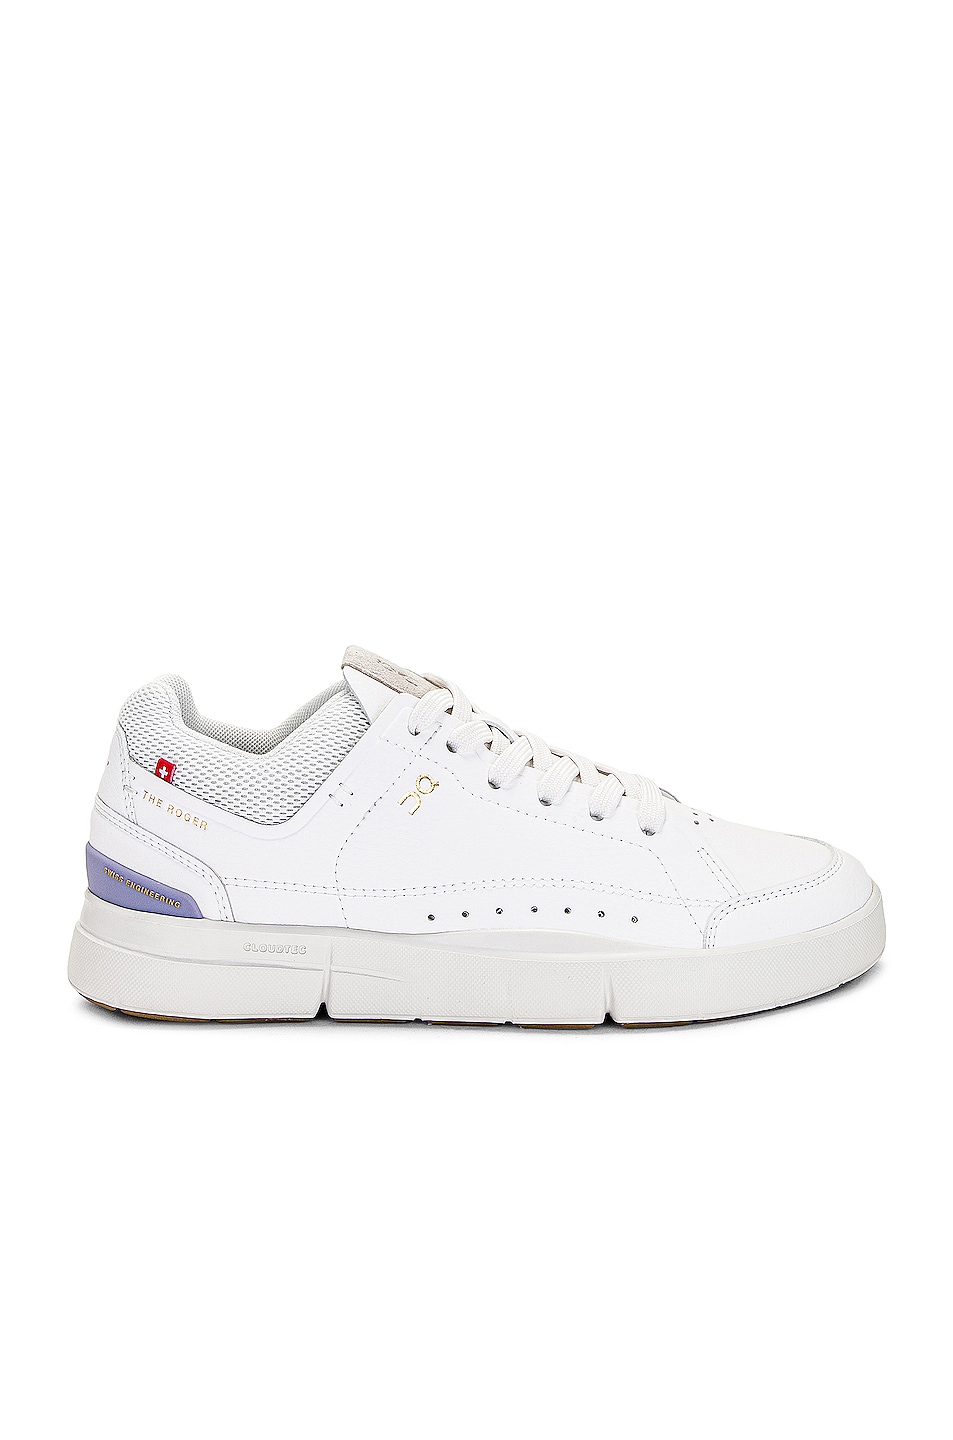 Image 1 of On the Roger Centre Court Sneaker in White Lavender